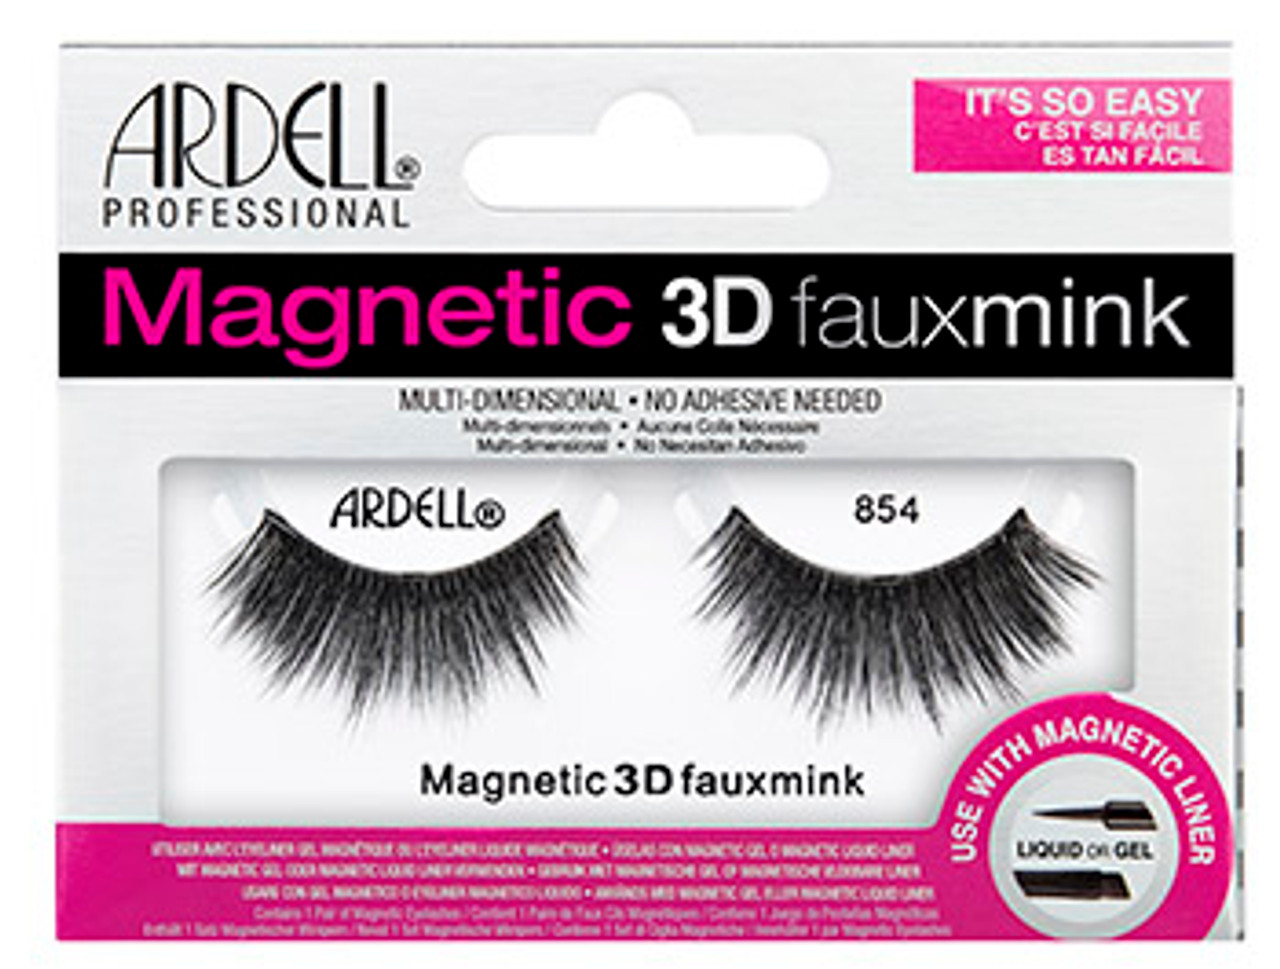 Ardell Professional Magnetic 3D fauxmink 854